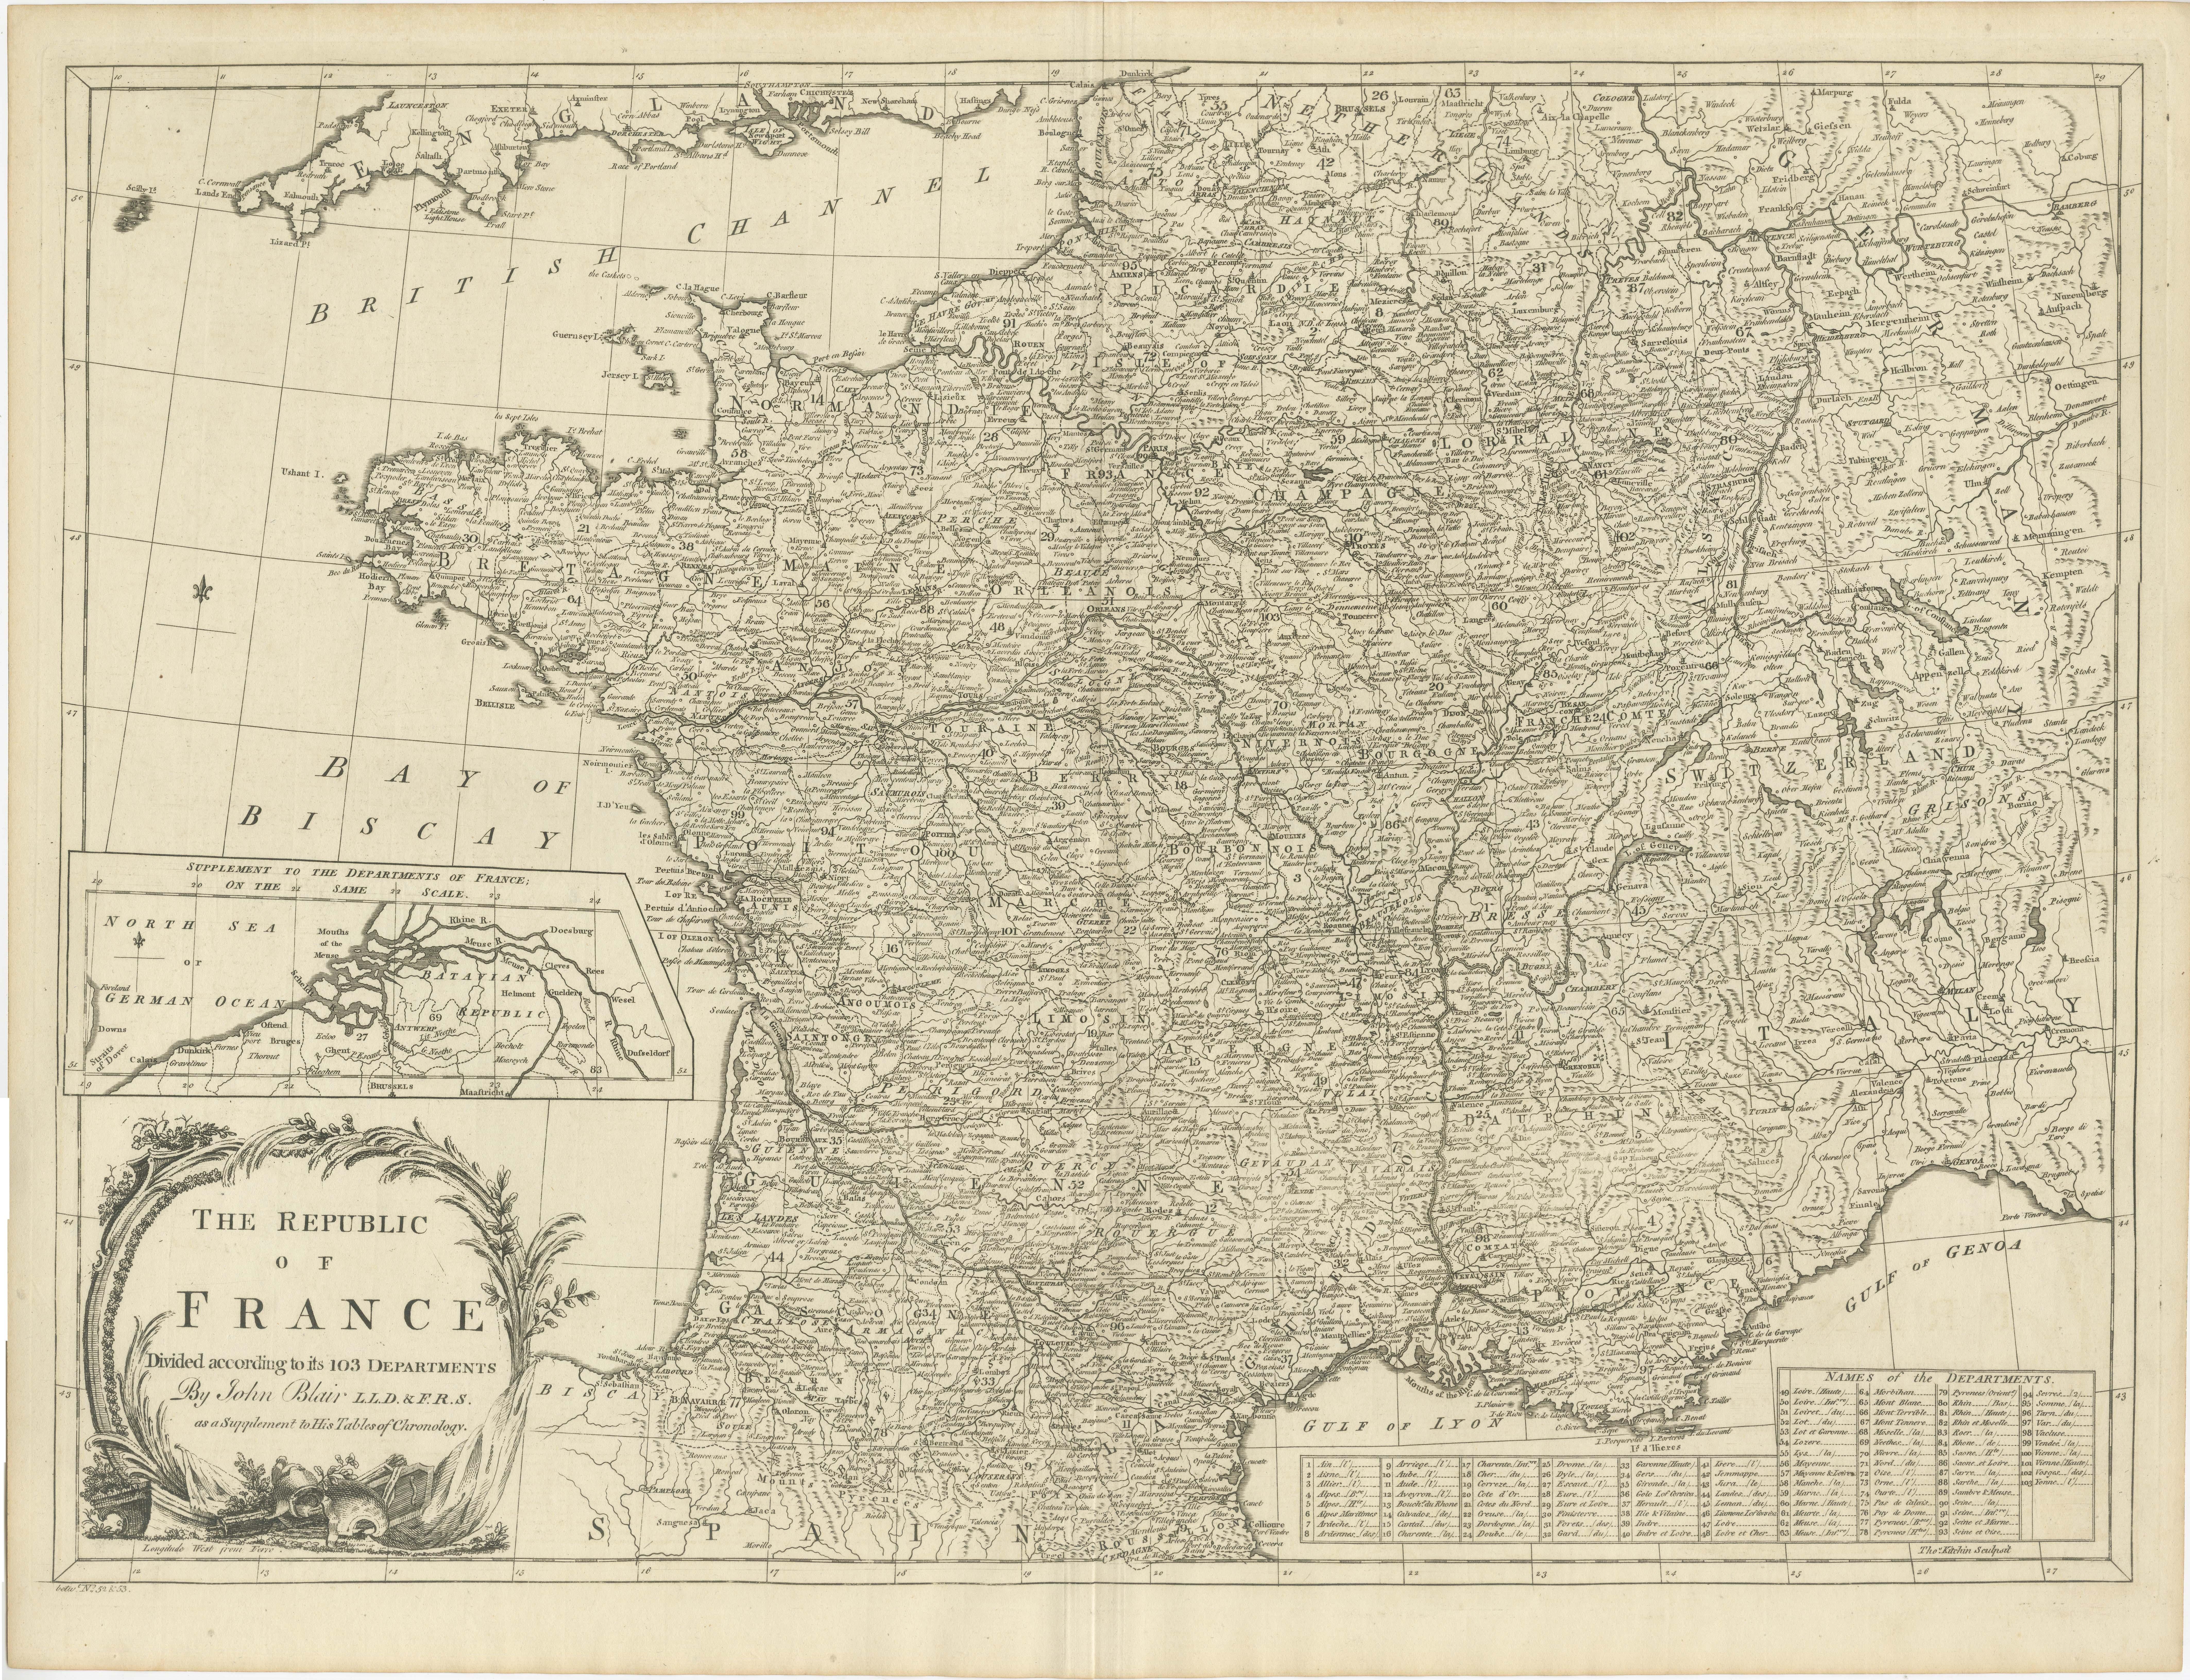 Antique map titled 'The Republic of France divided according to its 103 Departments'. Decorative map of France. Includes a large cartouche and an inset, showing the northern Departments. Engraved by T. Kitchin, drawn by John Blair. Published circa